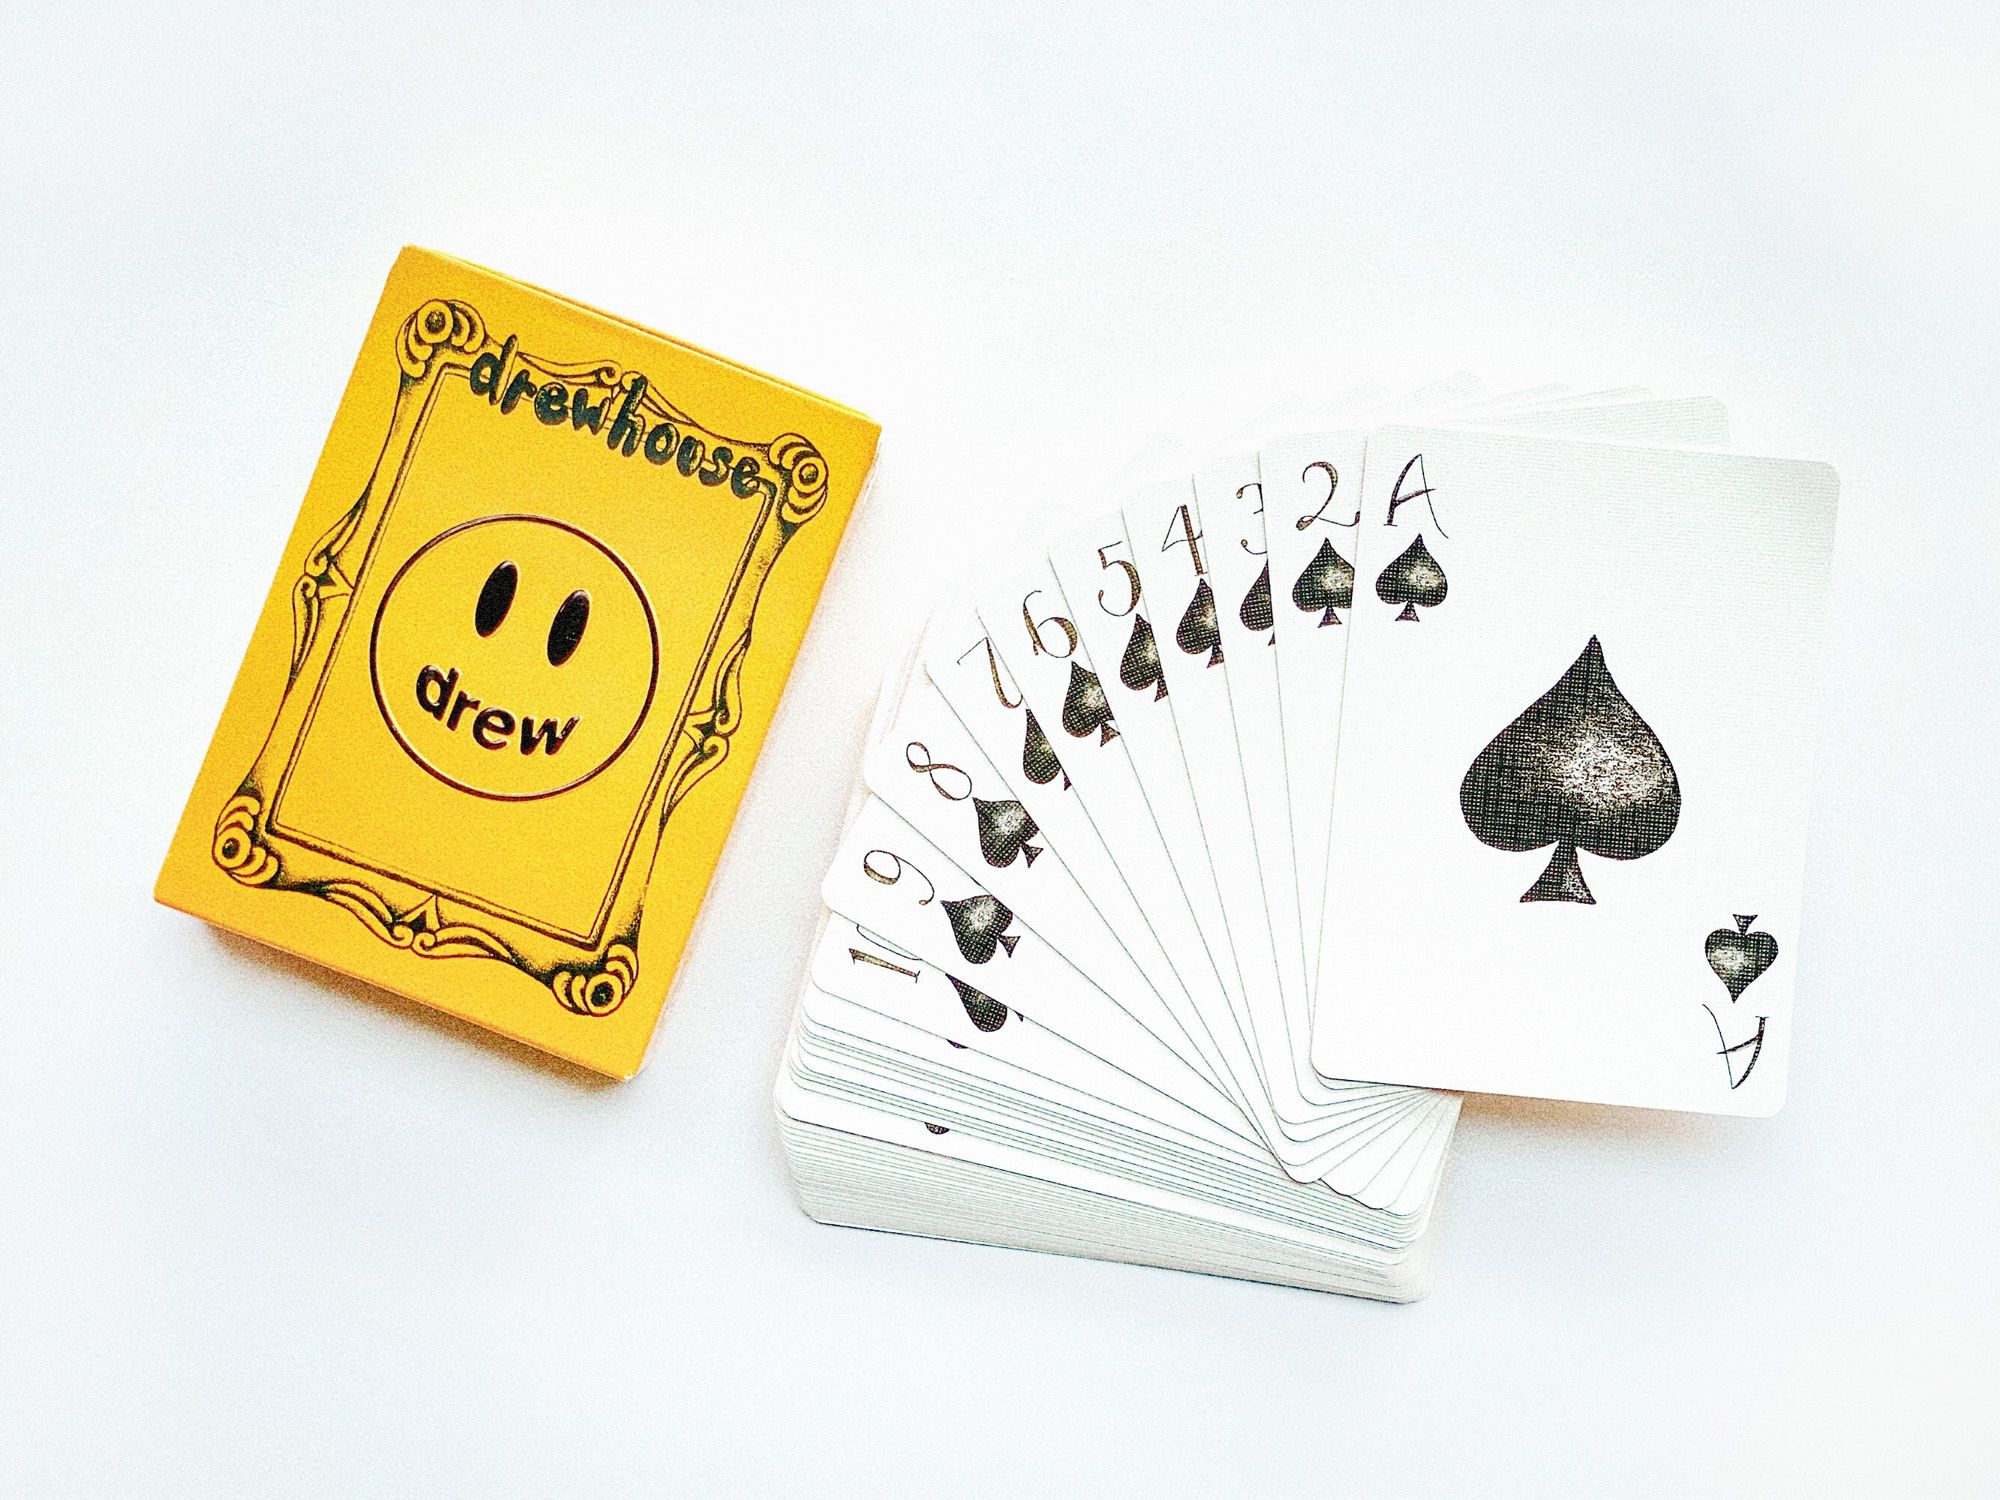  Drew House Playing Card 